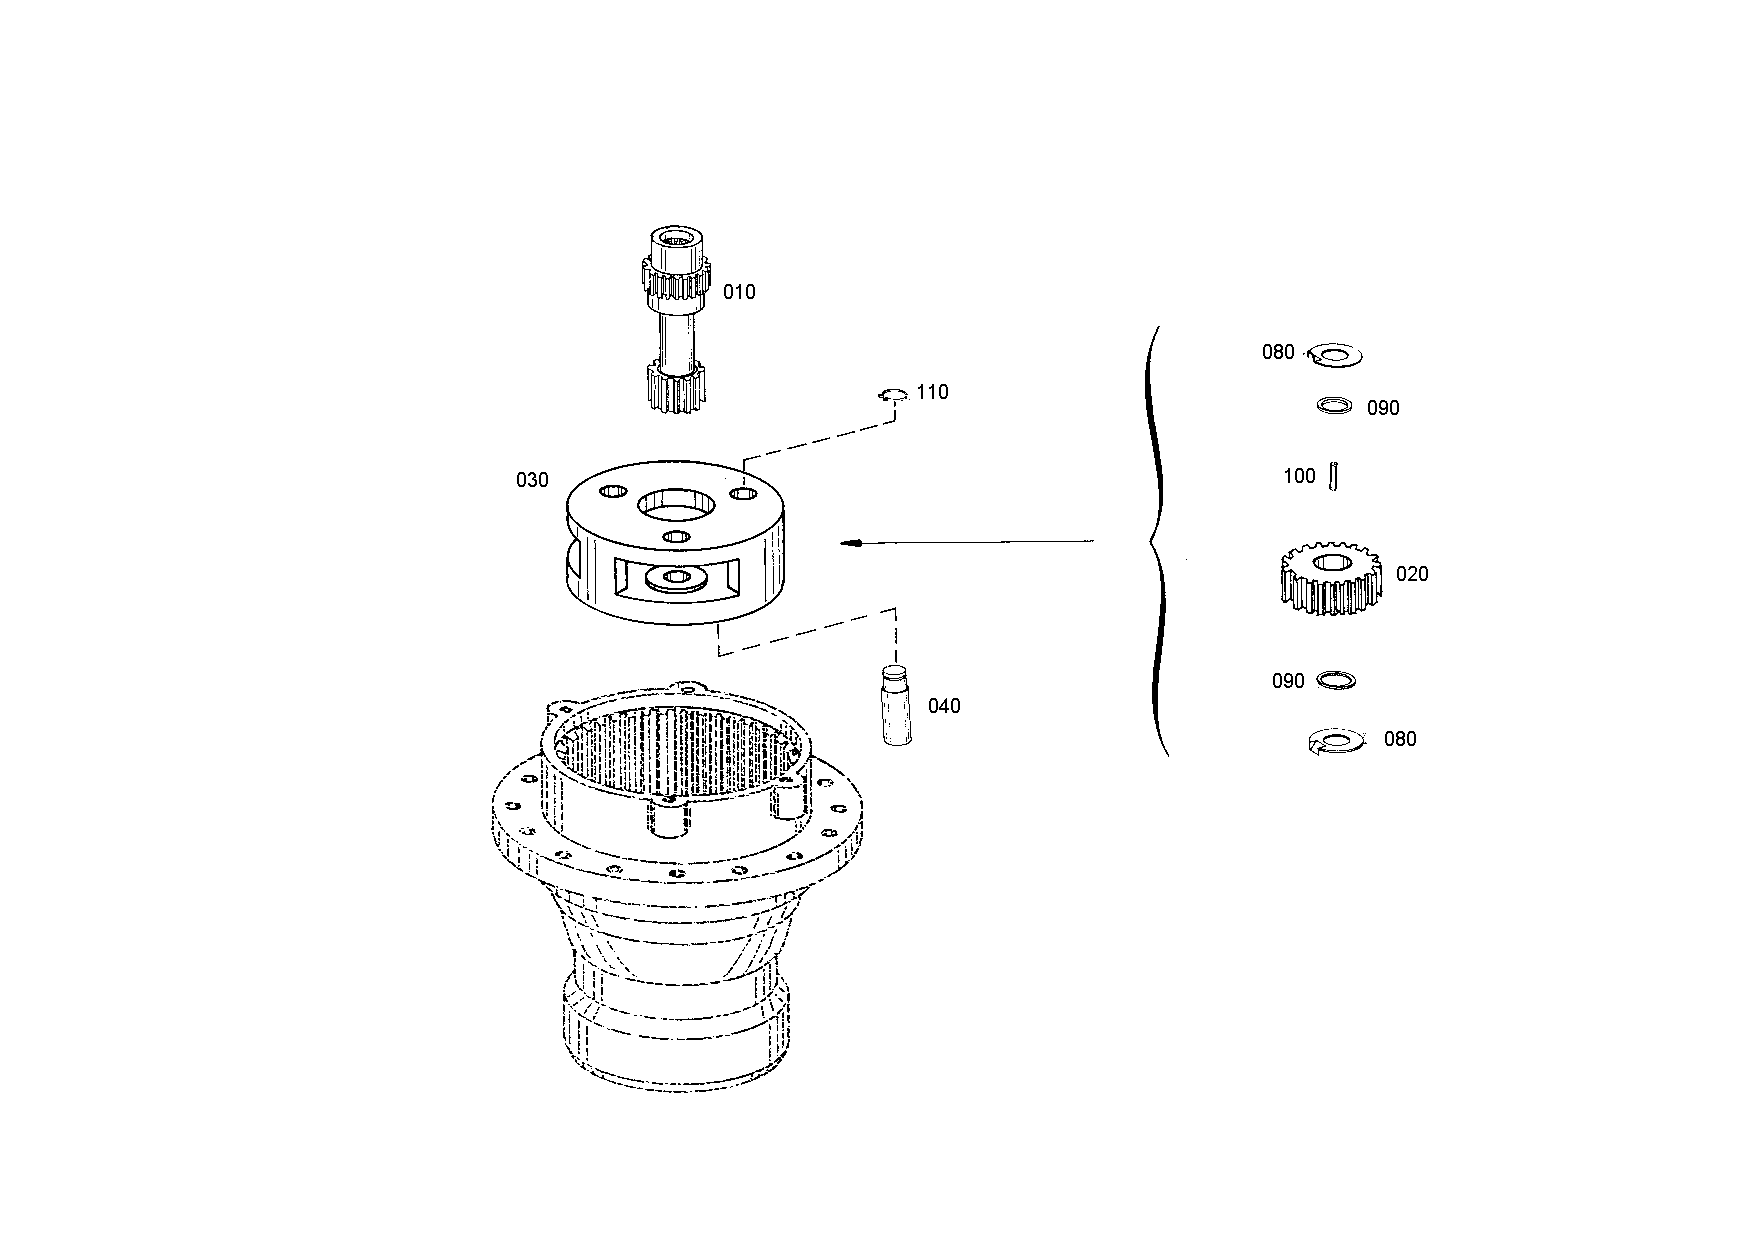 drawing for FUCHS-BAGGER GMBH + CO.KG 5904658883 - PLANETARY GEAR (figure 1)